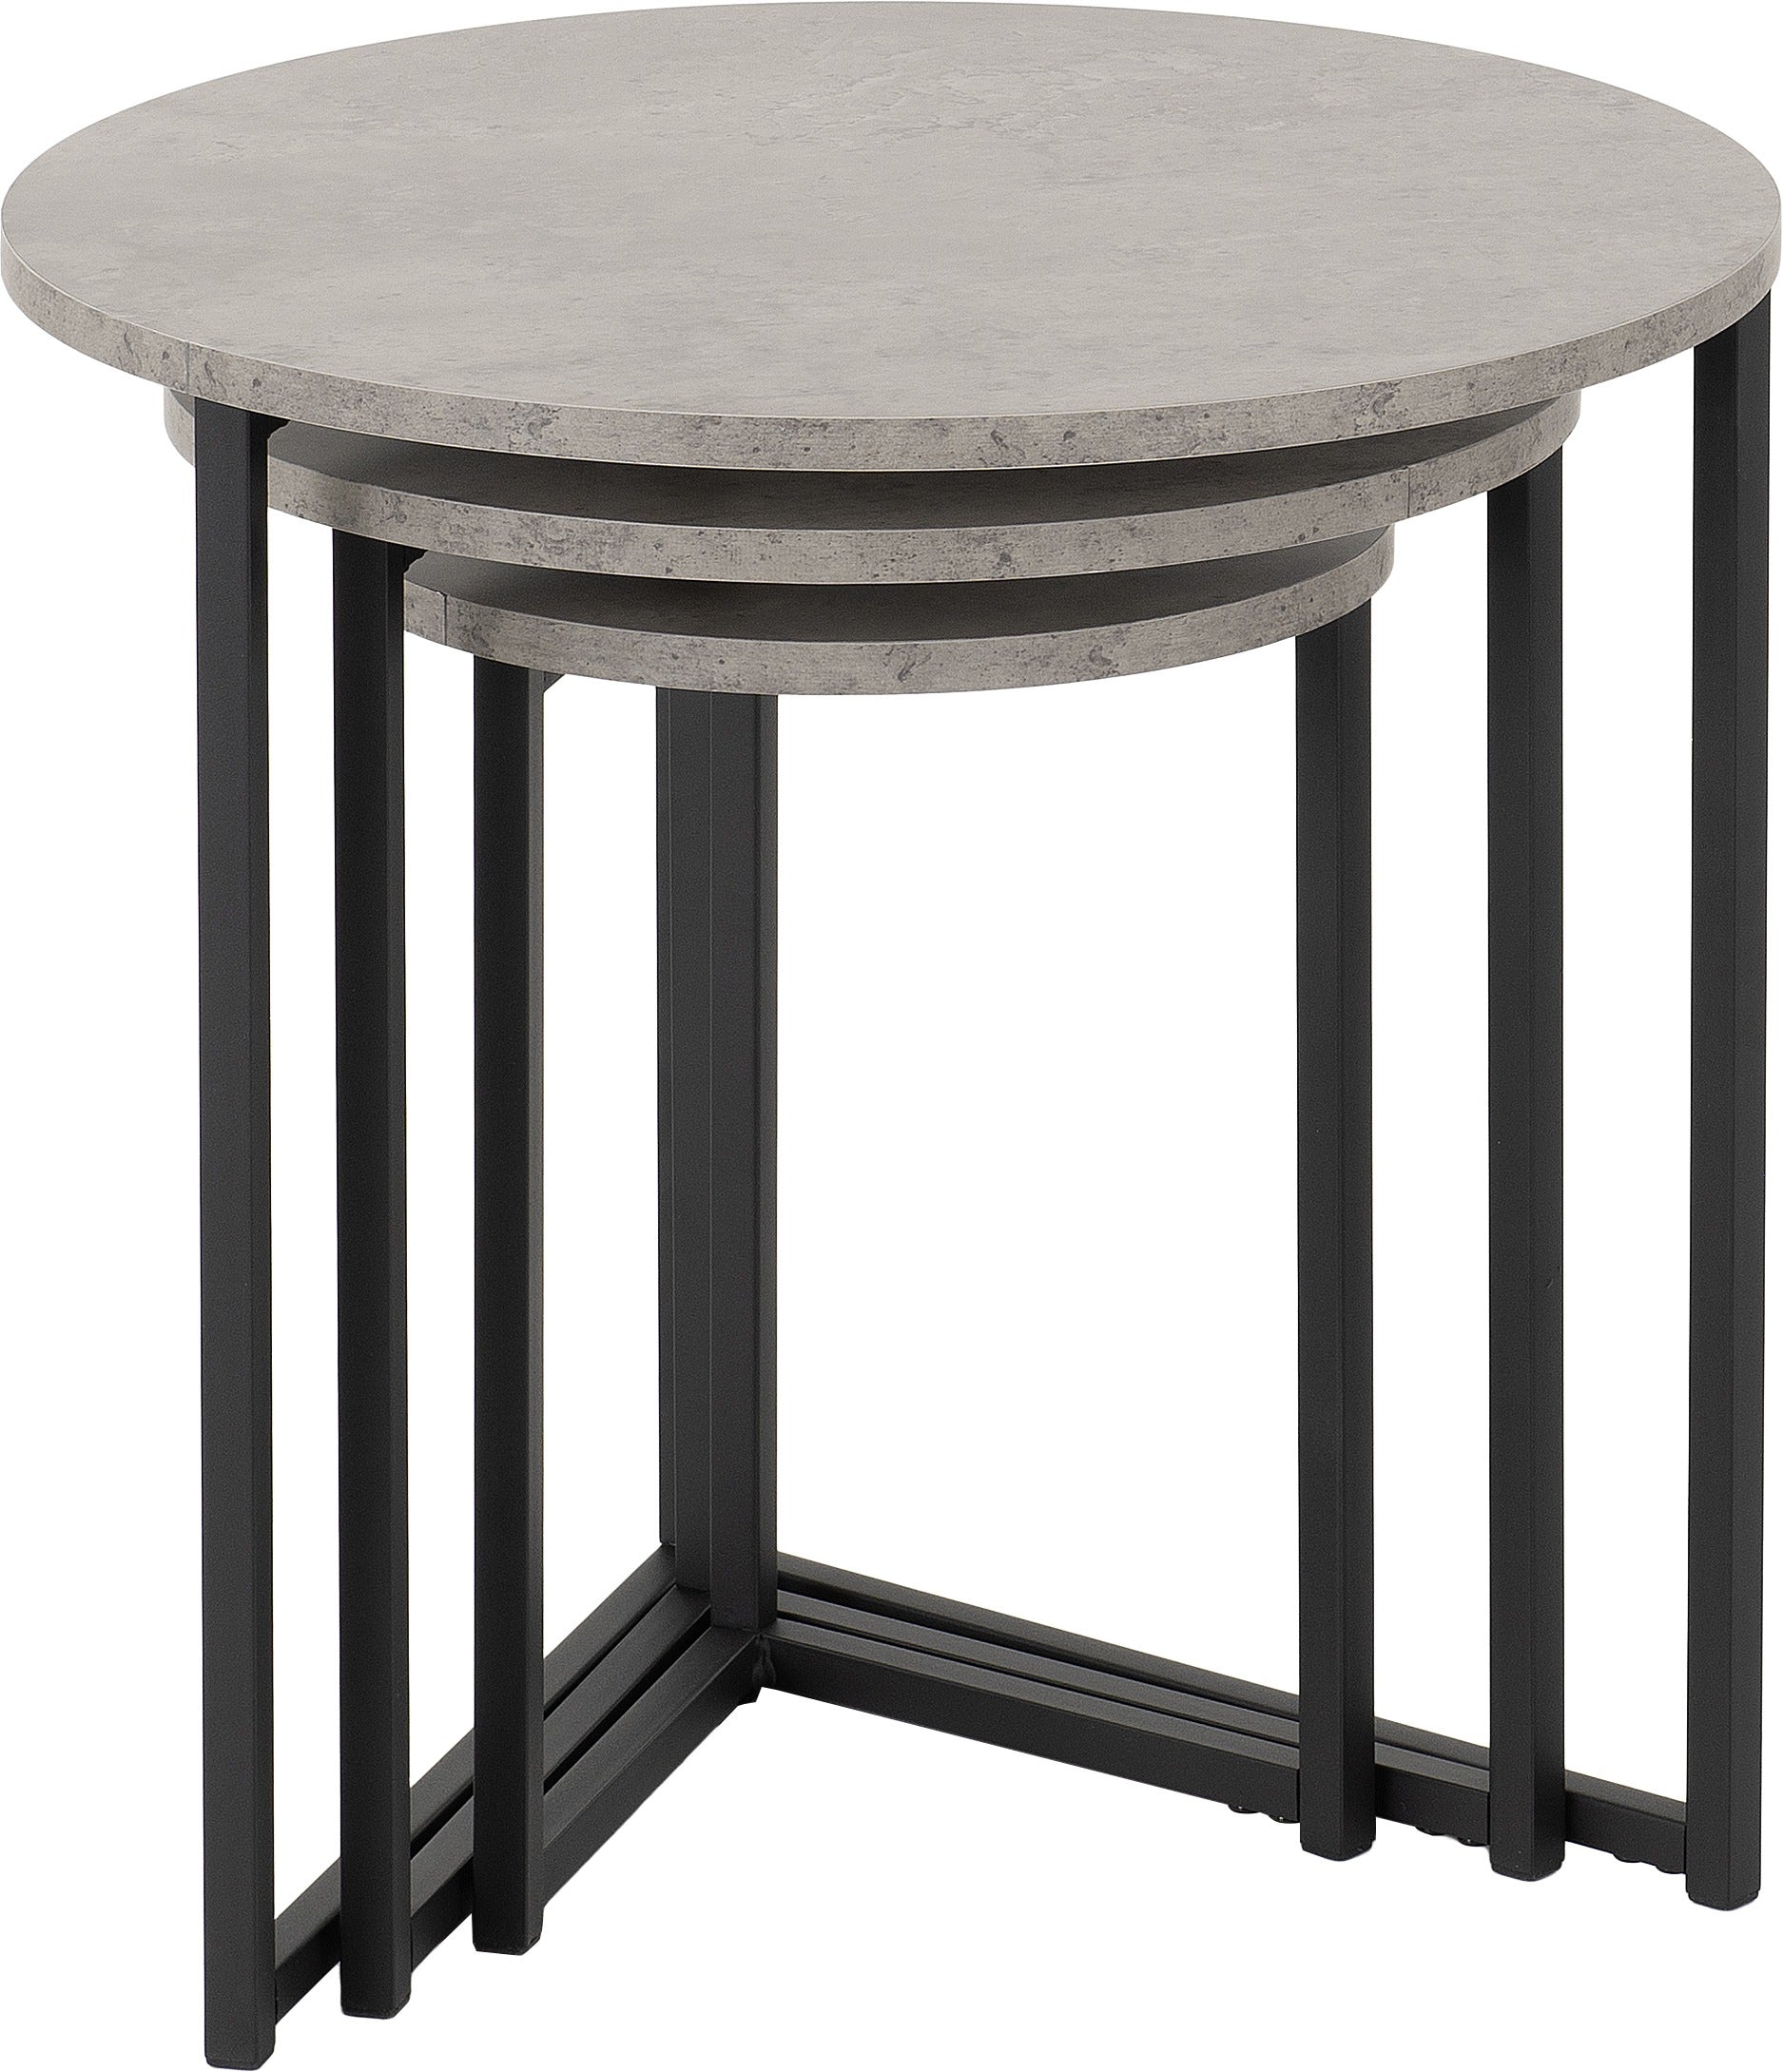 Athens Round Nest of Tables- Concrete Effect/Black- The Right Buy Store